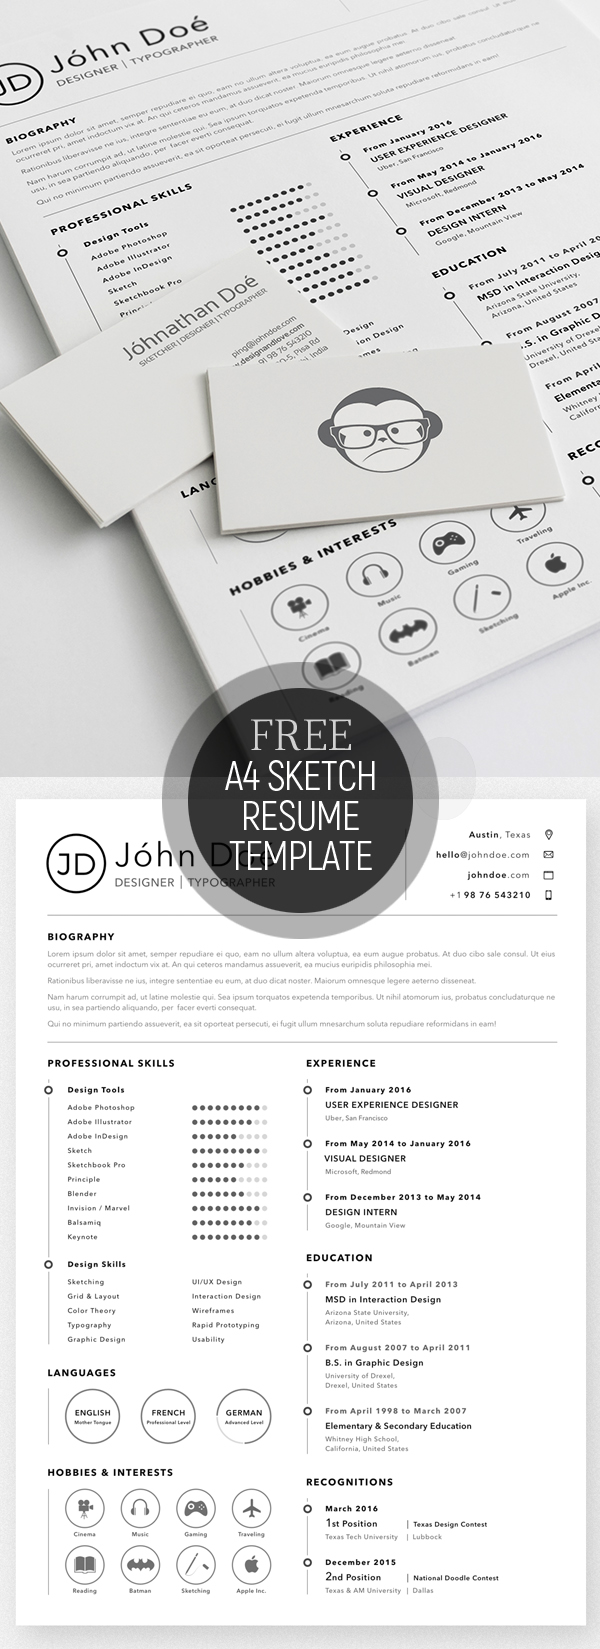 Free A4 Resume Sketch Template